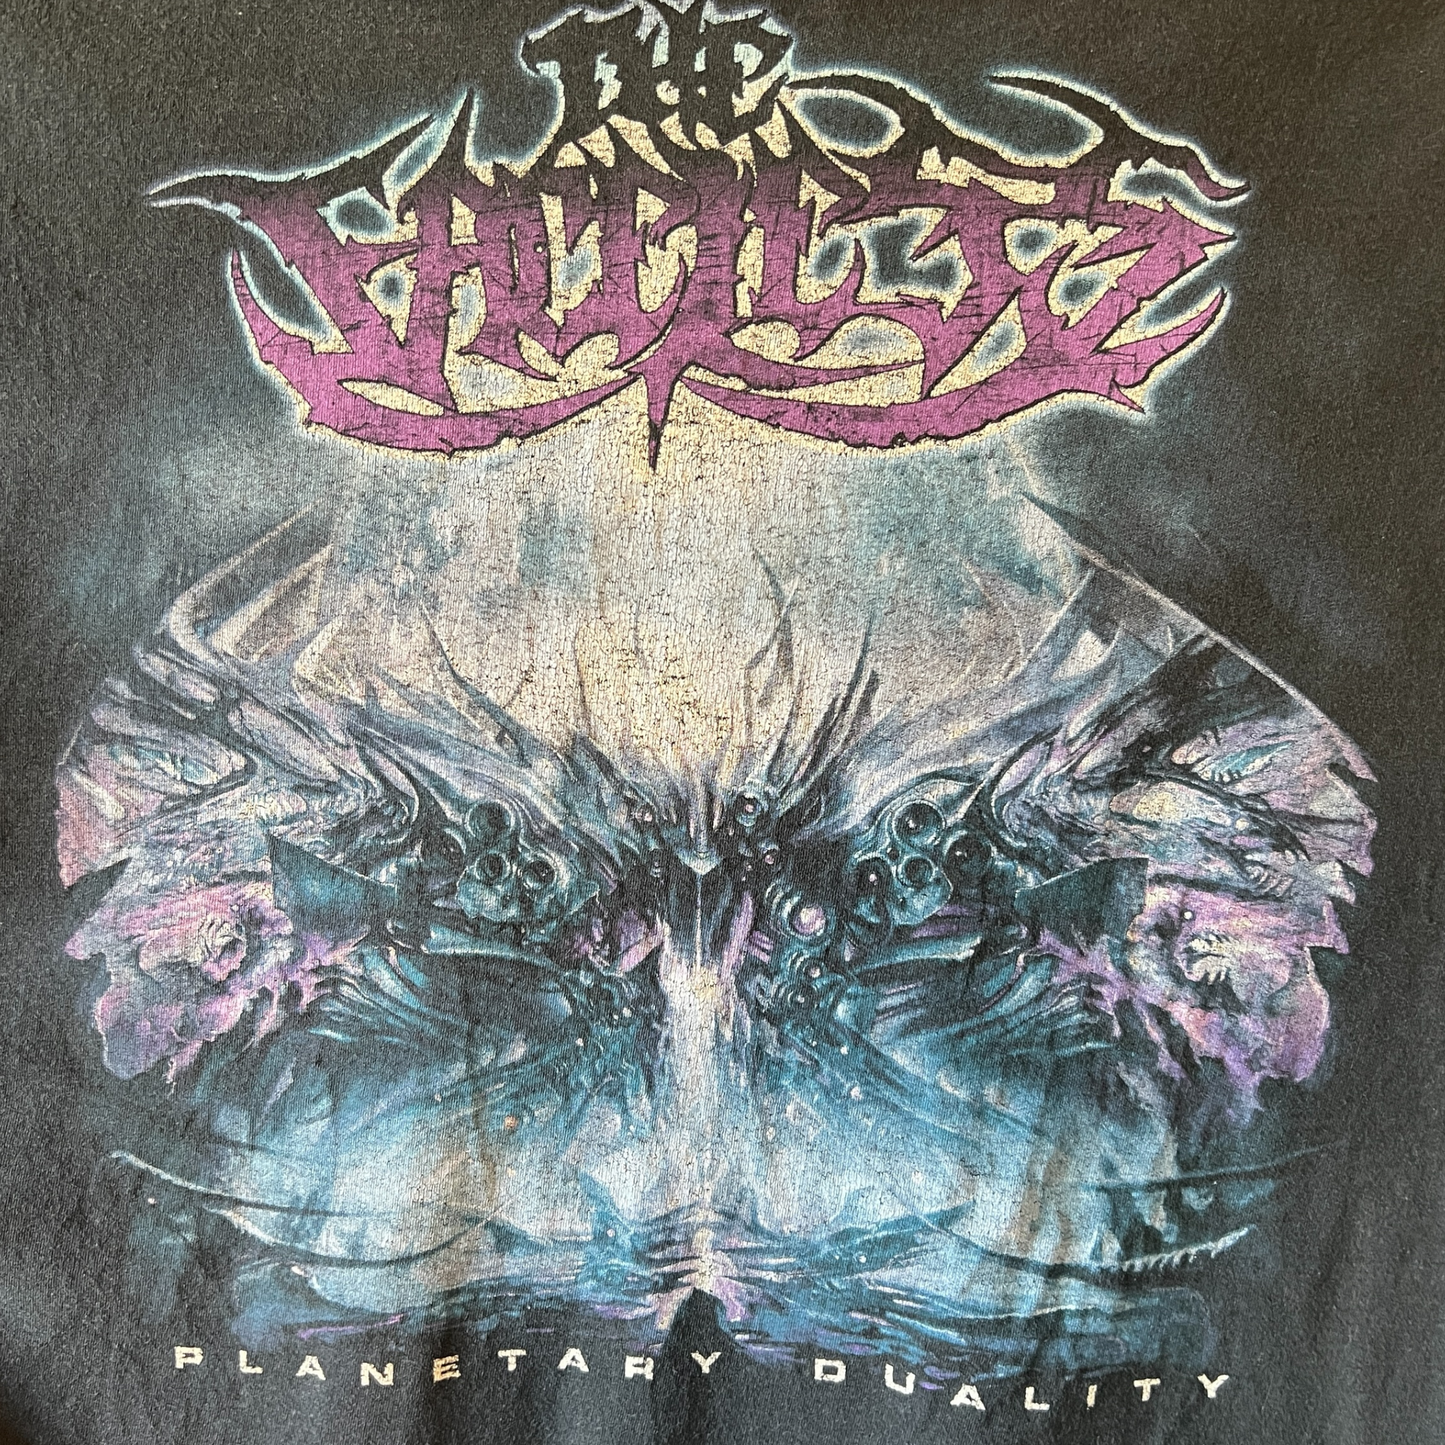 The Faceless - Planetary Duality T-Shirt Size XL